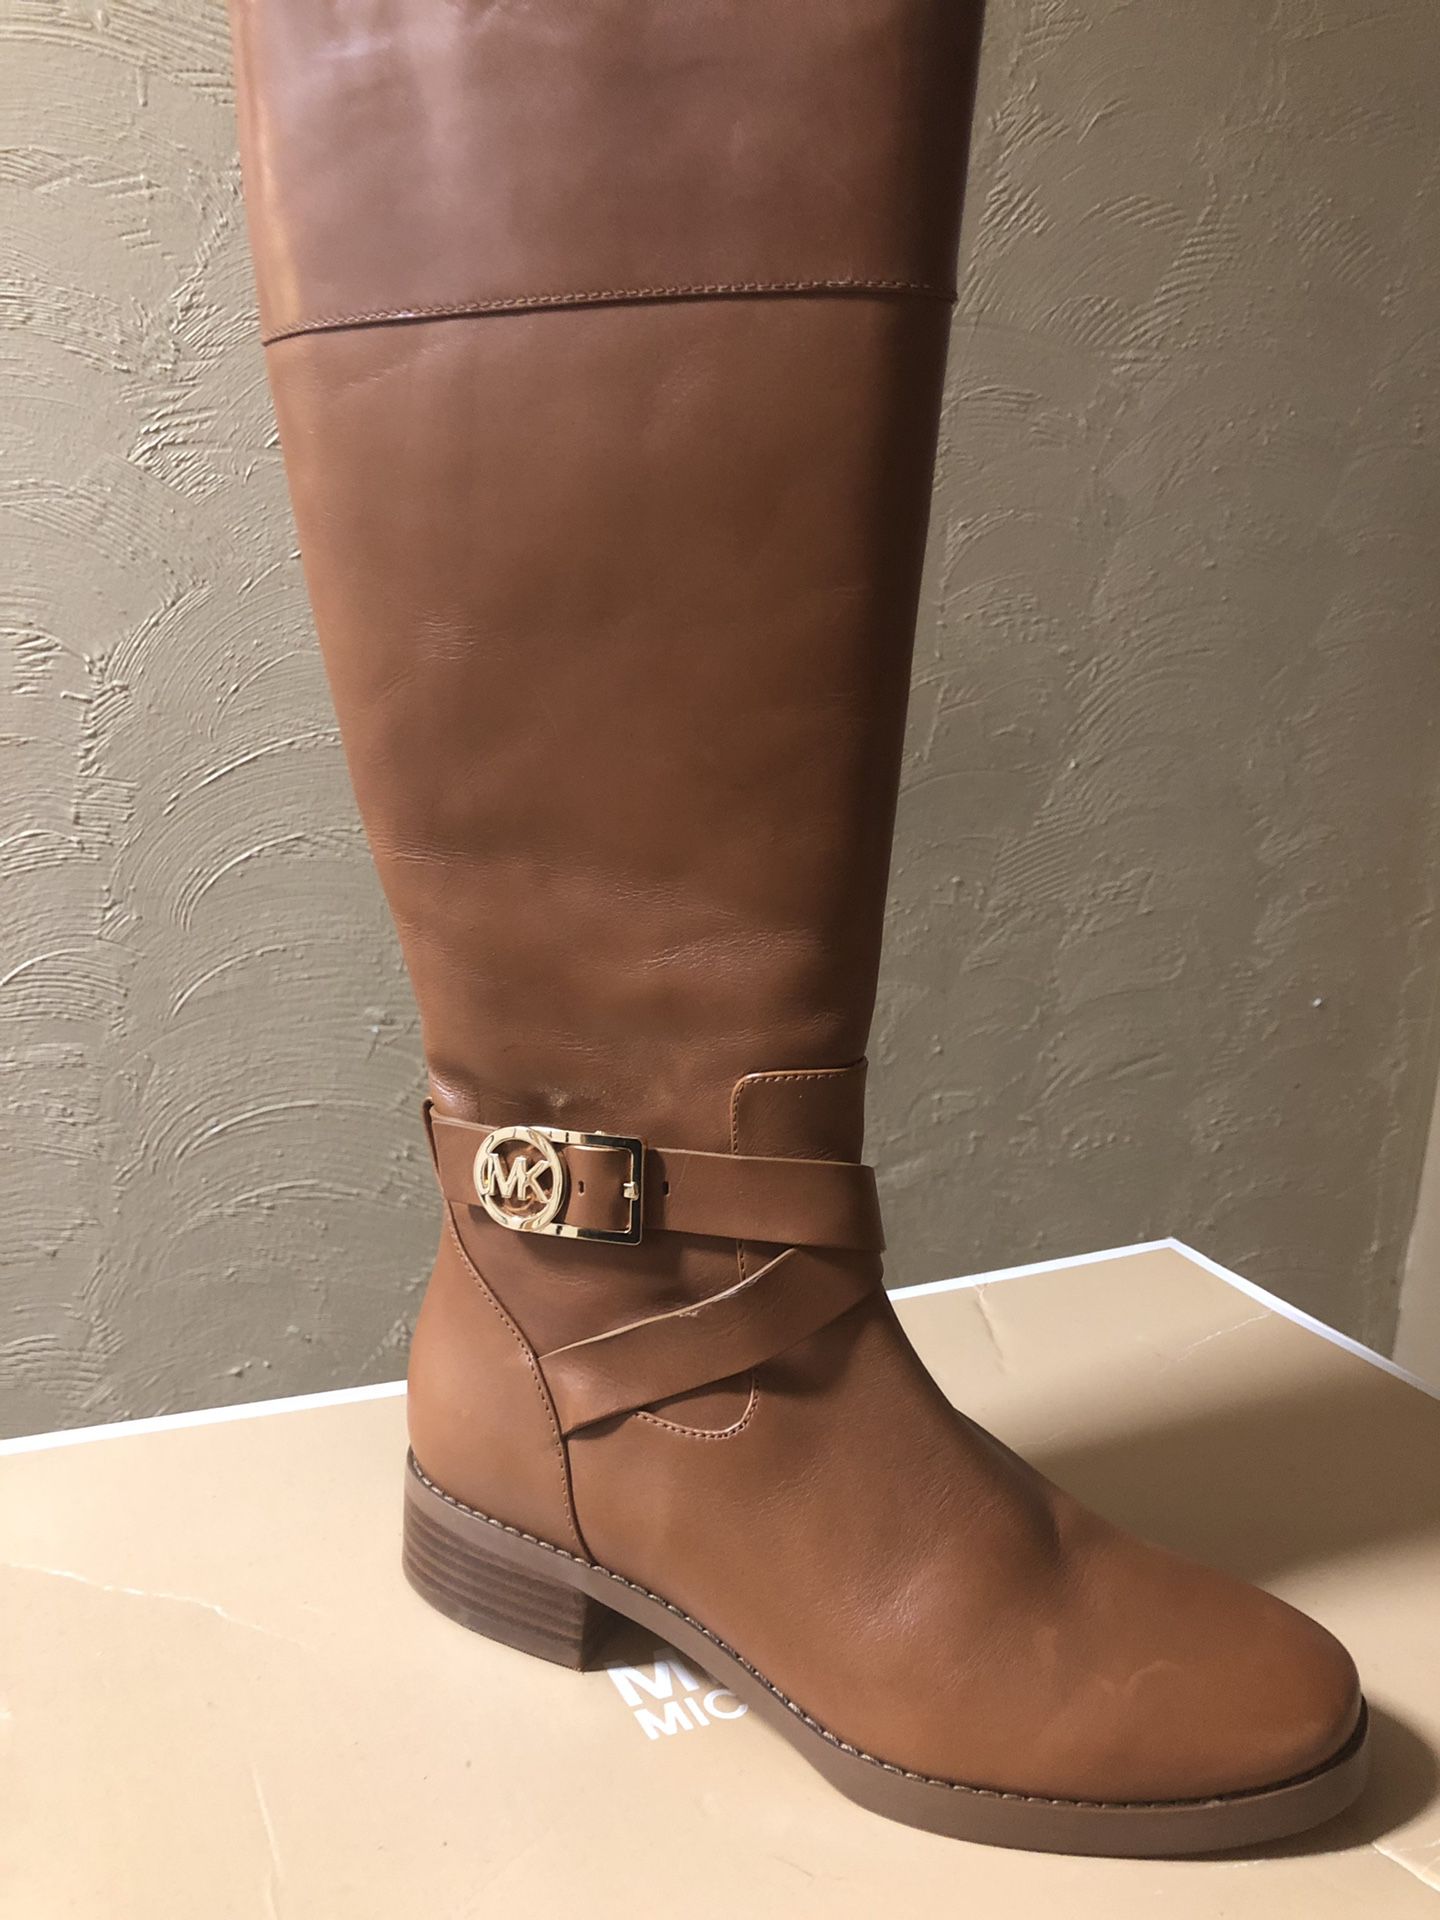 Michael Kors Luggage color boots.